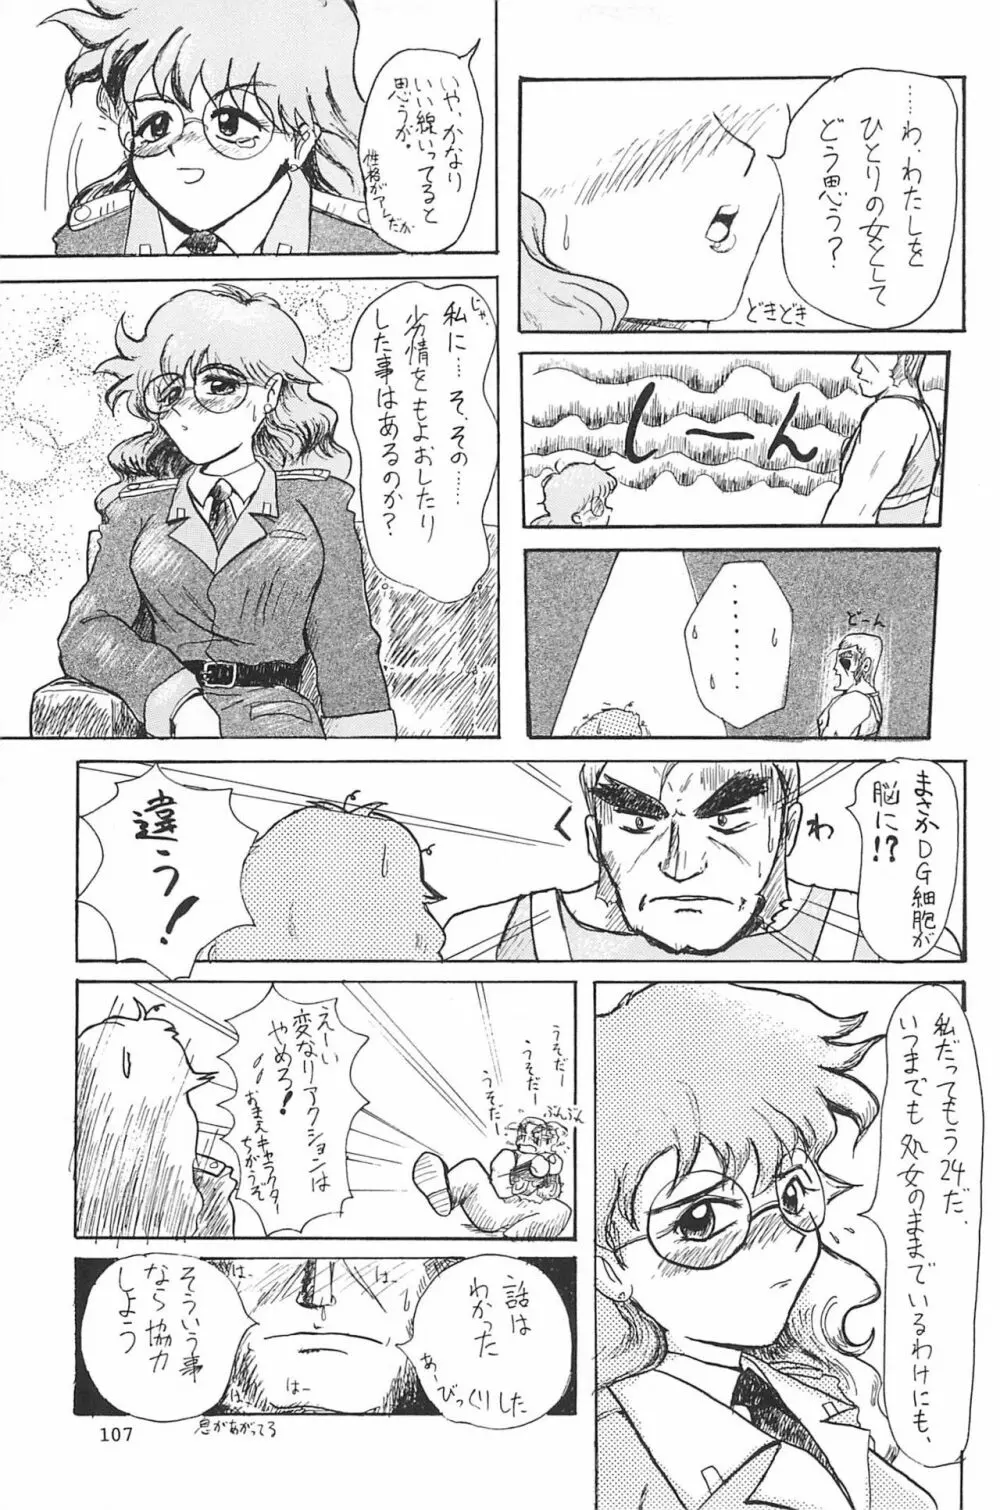 ND-special Volume 1 107ページ